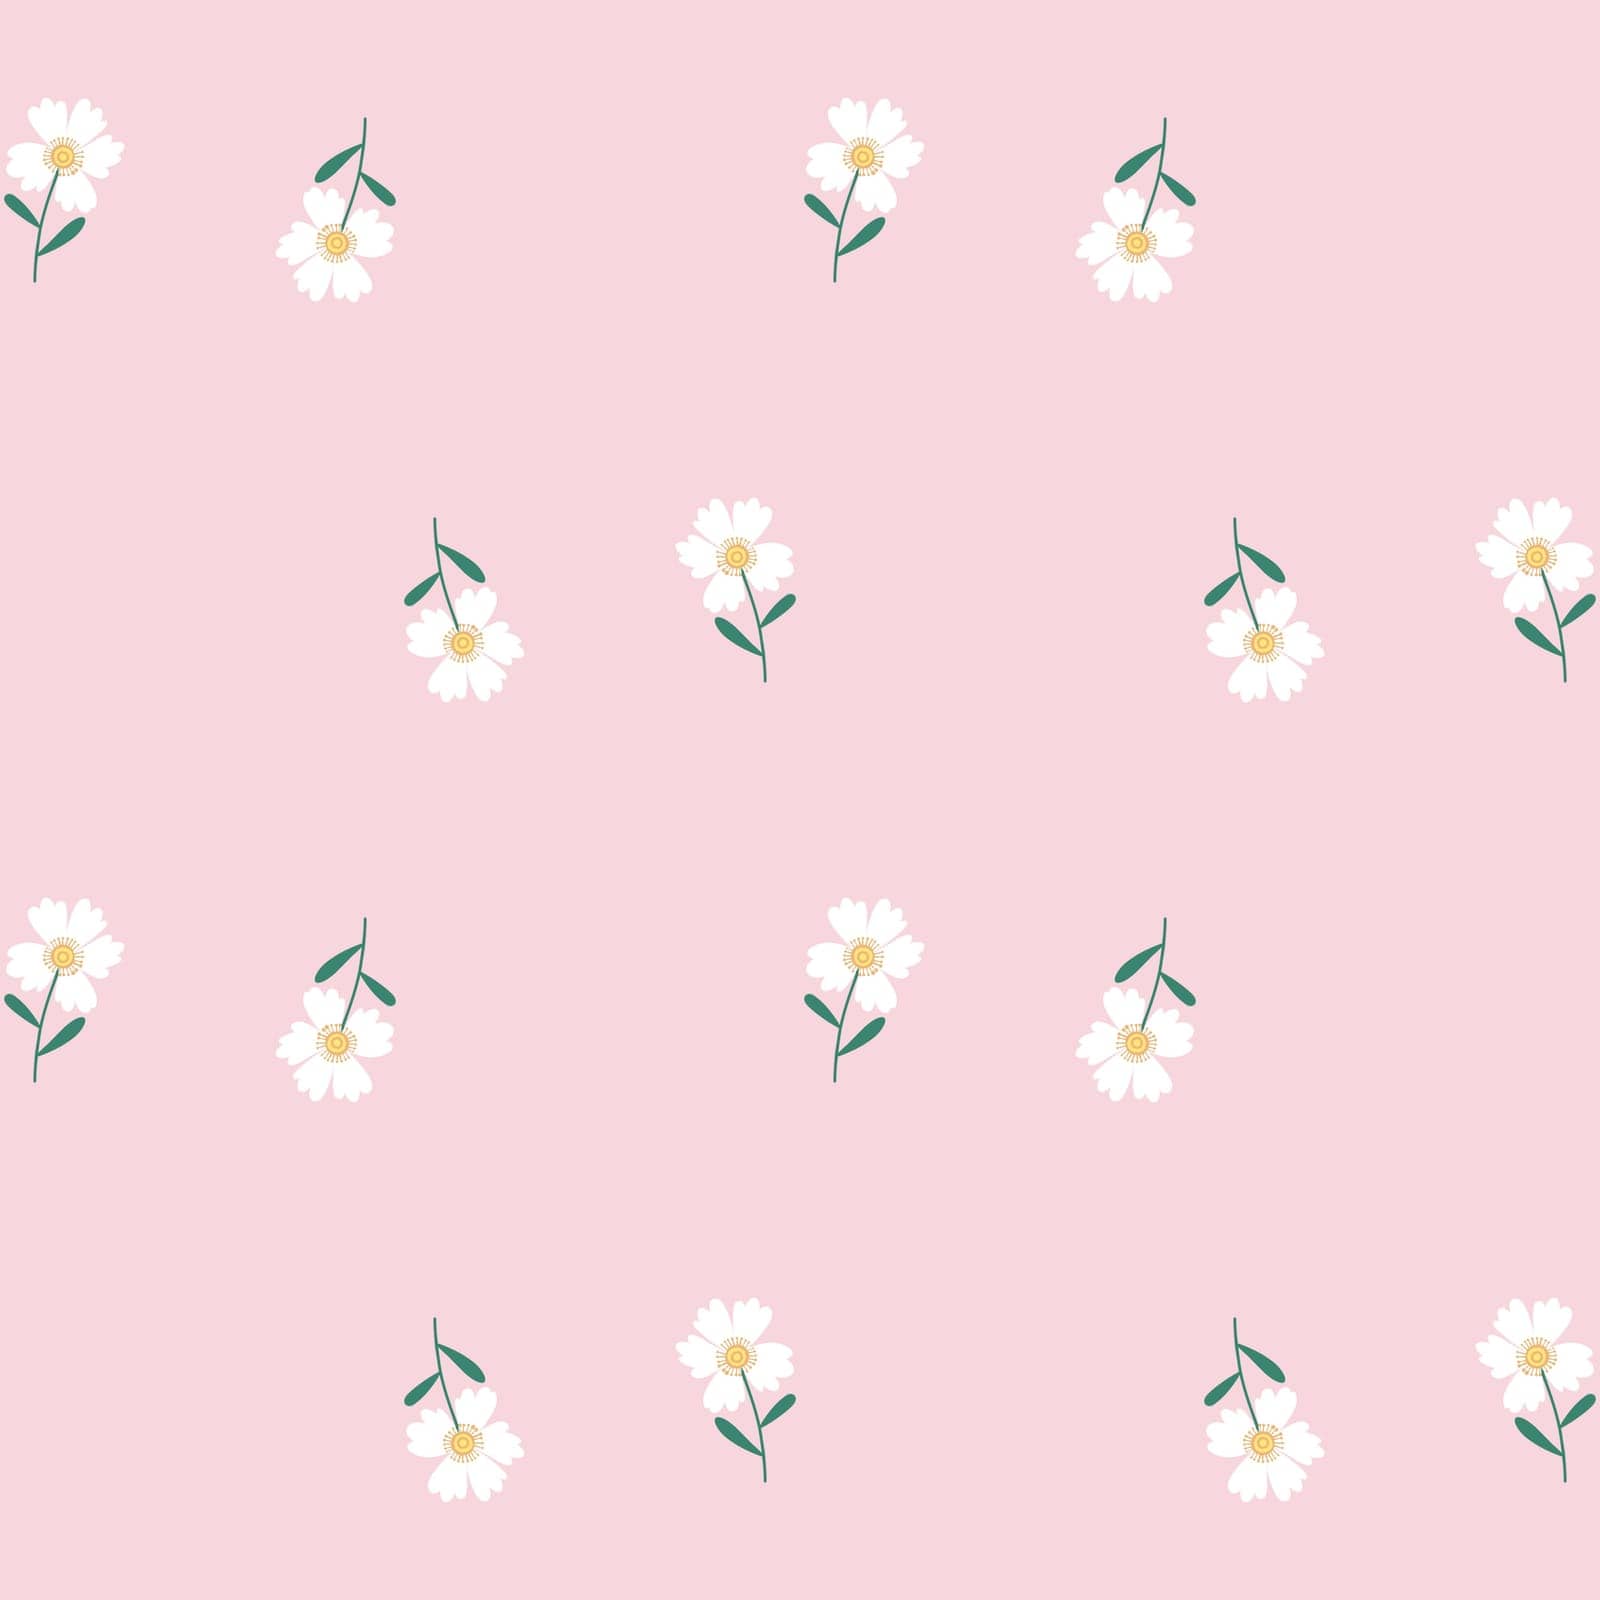 Floral Seamless Pattern of Sparse White Flowers on Pink Background. Wallpaper Design for Textiles, Fabrics, Decorations, Papers Prints, Fashion Backgrounds, Wrappings Packaging.